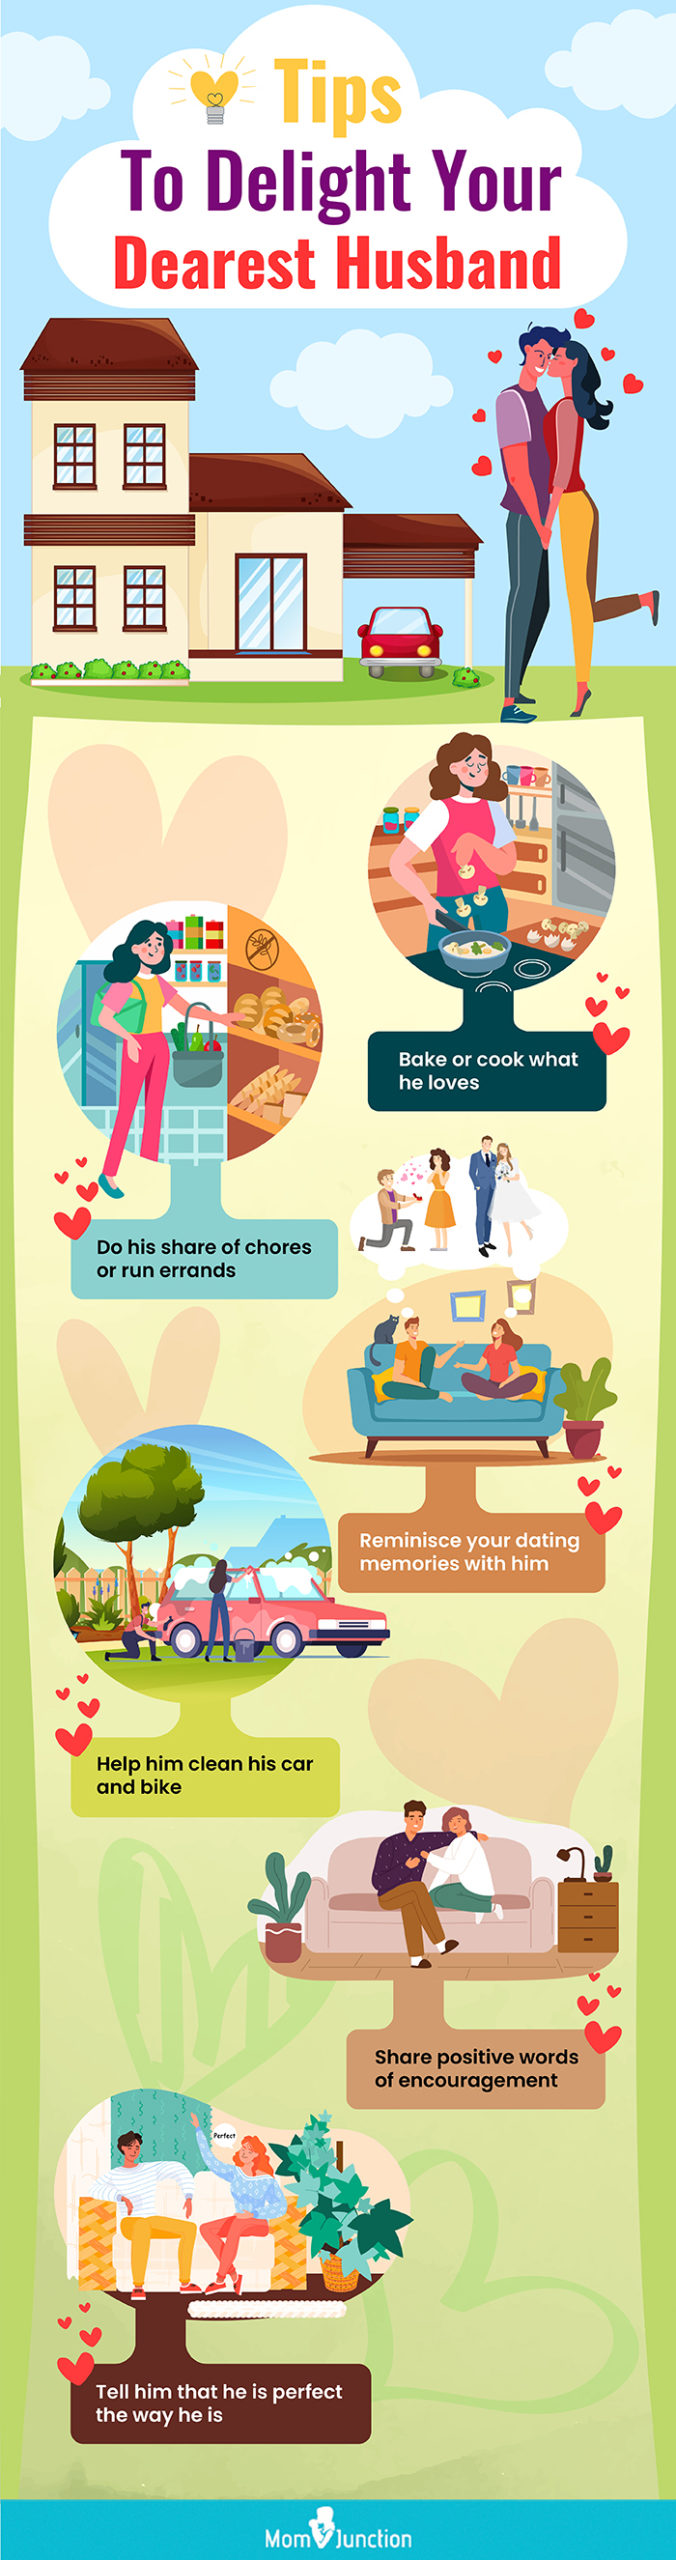 tips to delight your dearest husband (infographic)